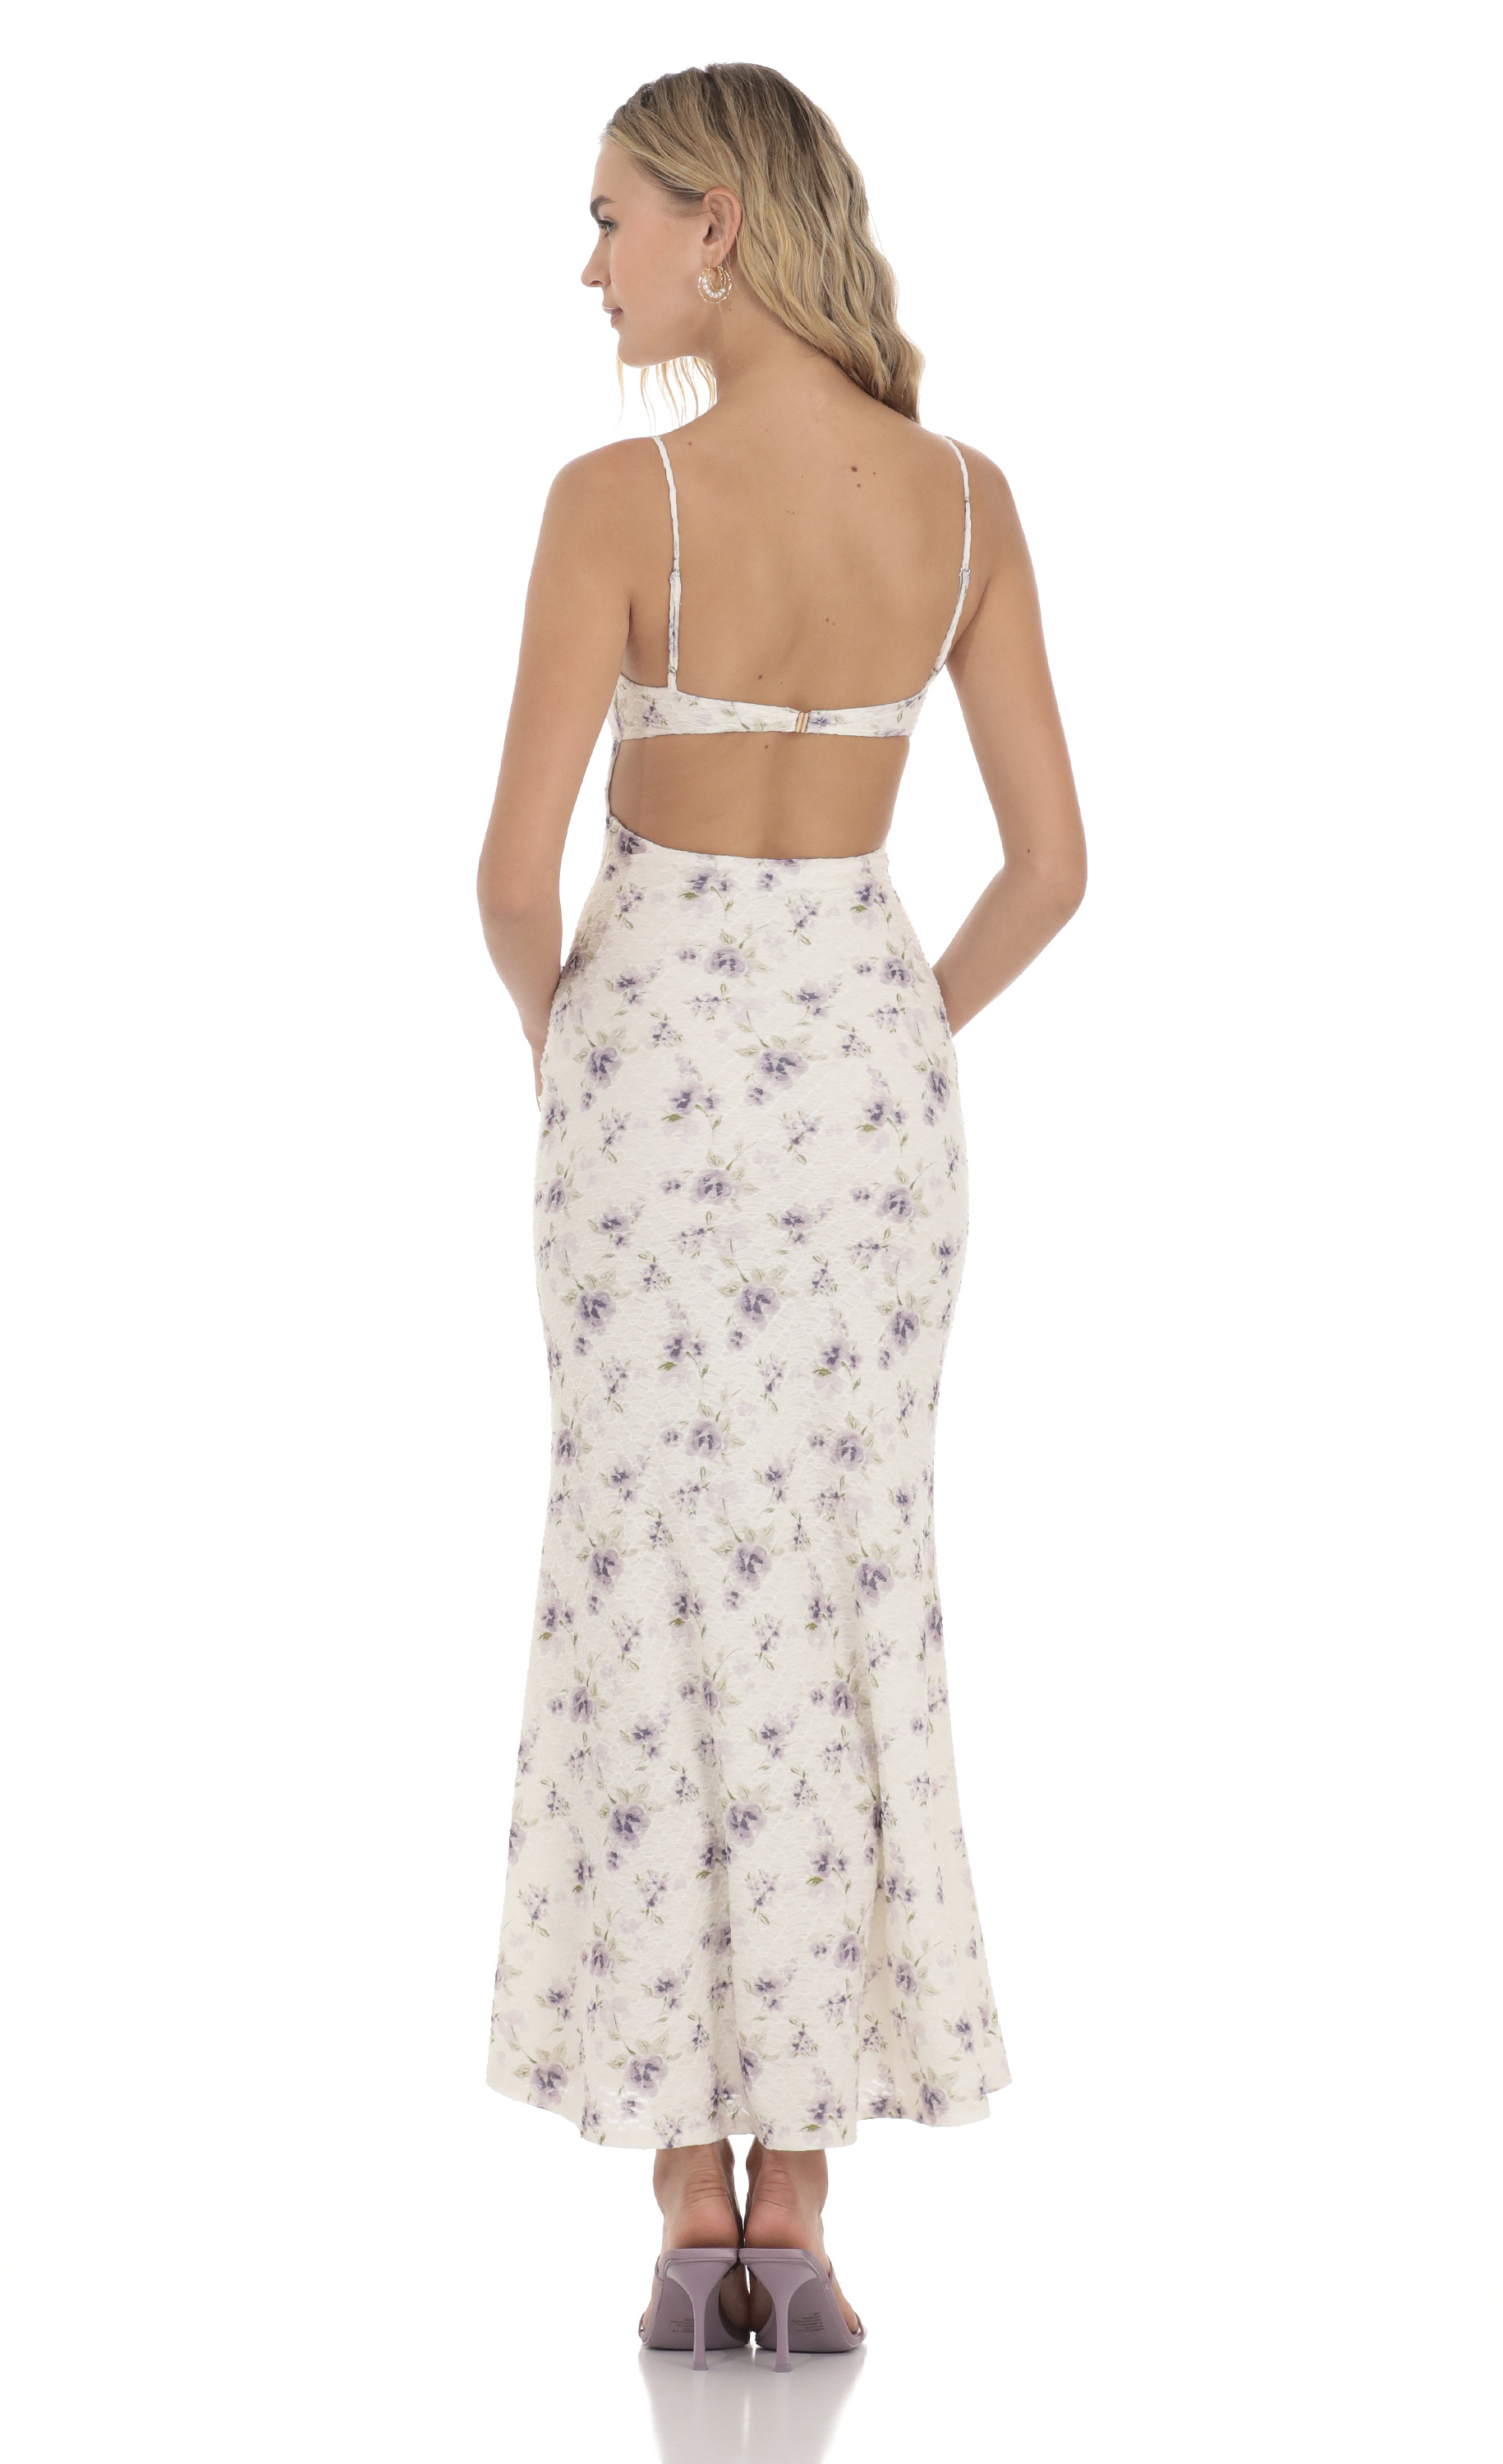 Lace Floral Maxi Dress in White